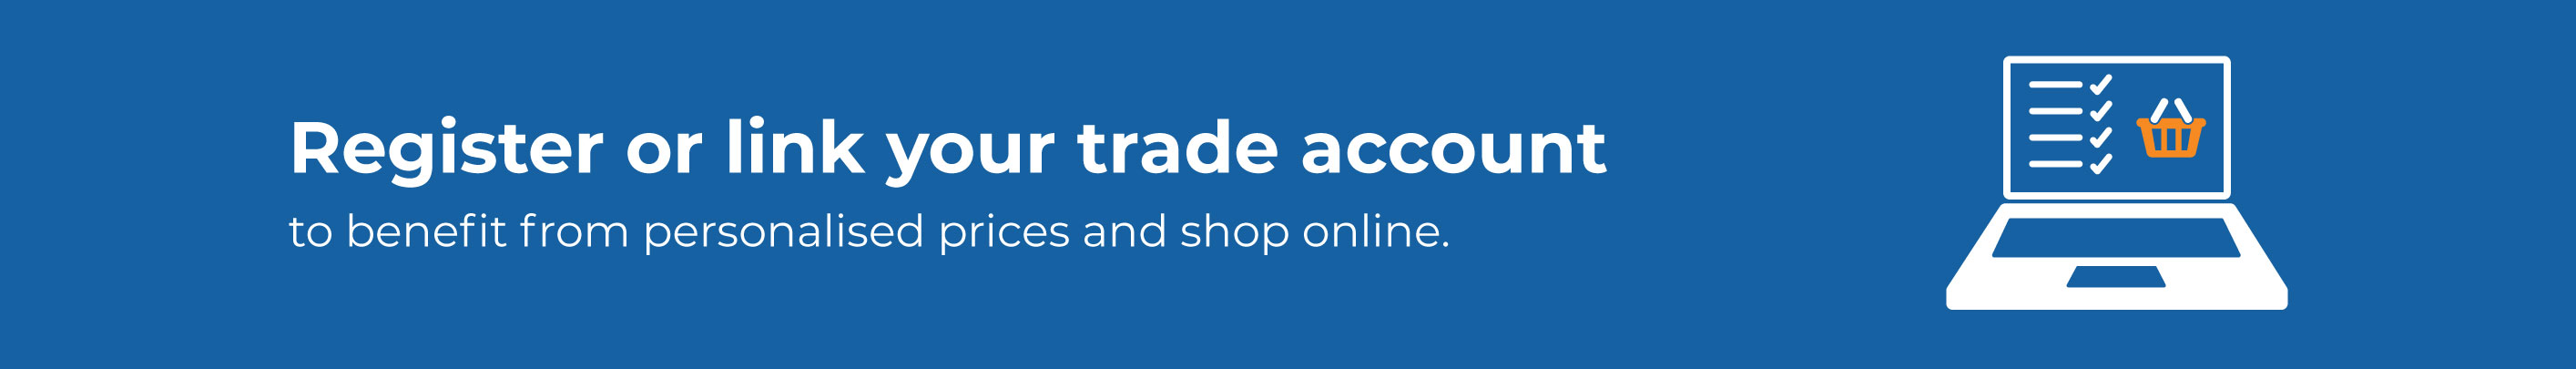 Link your trade account to shop online